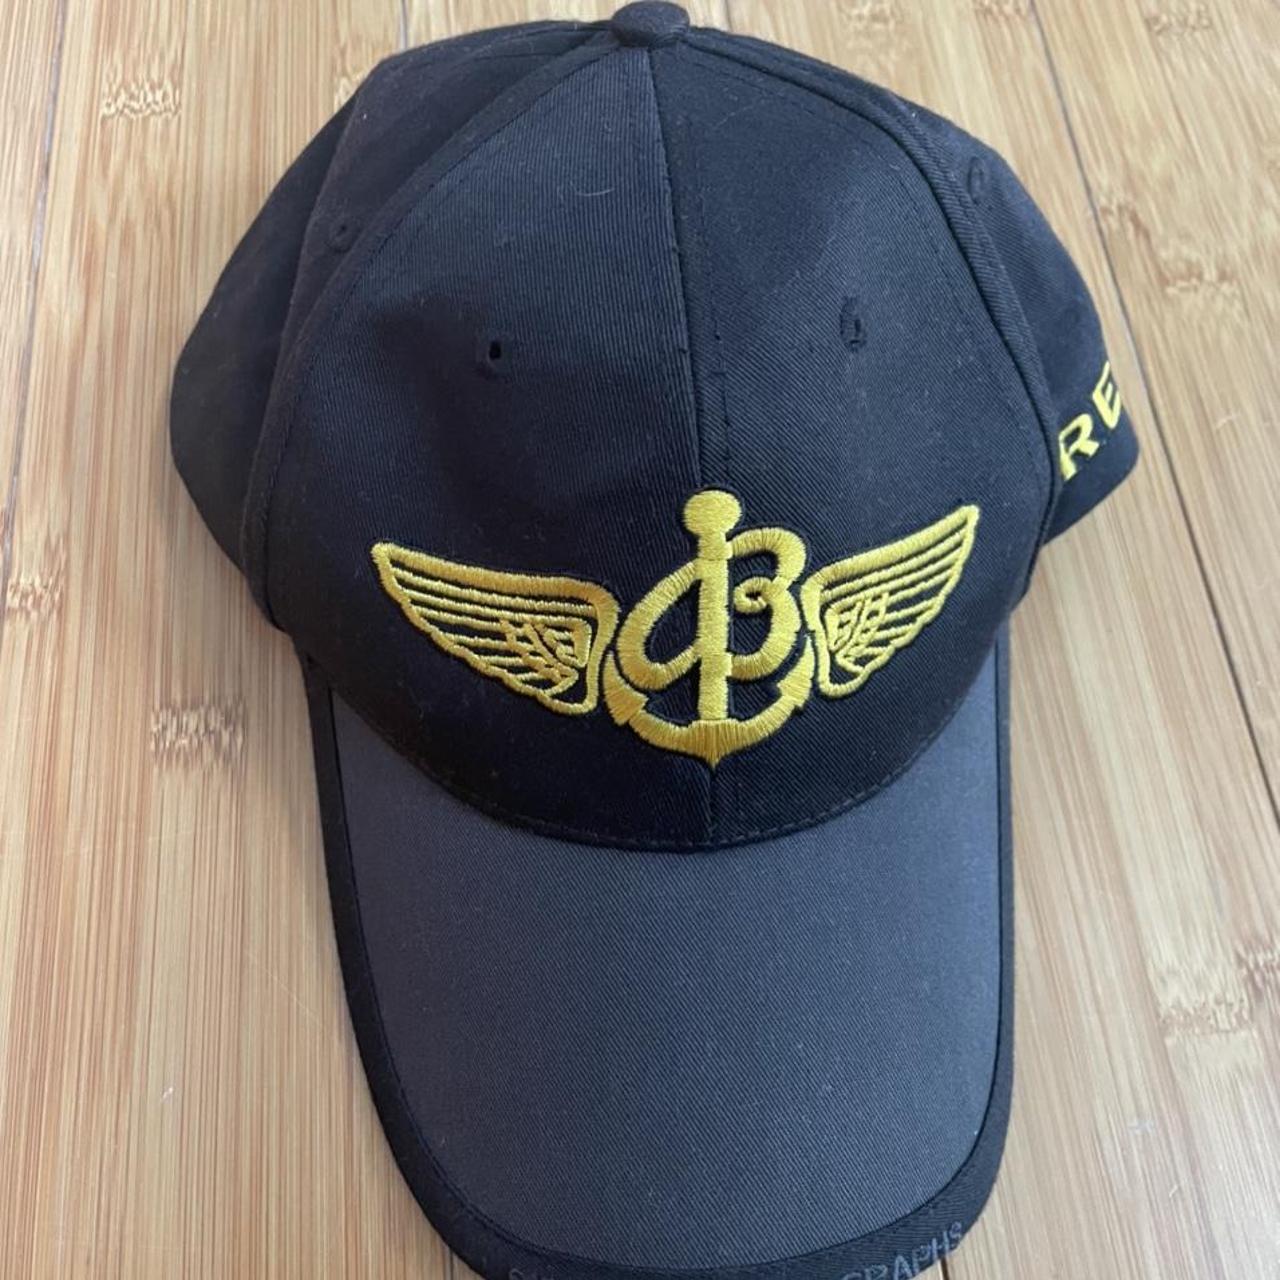 Breitling Men's Navy and Gold Hat